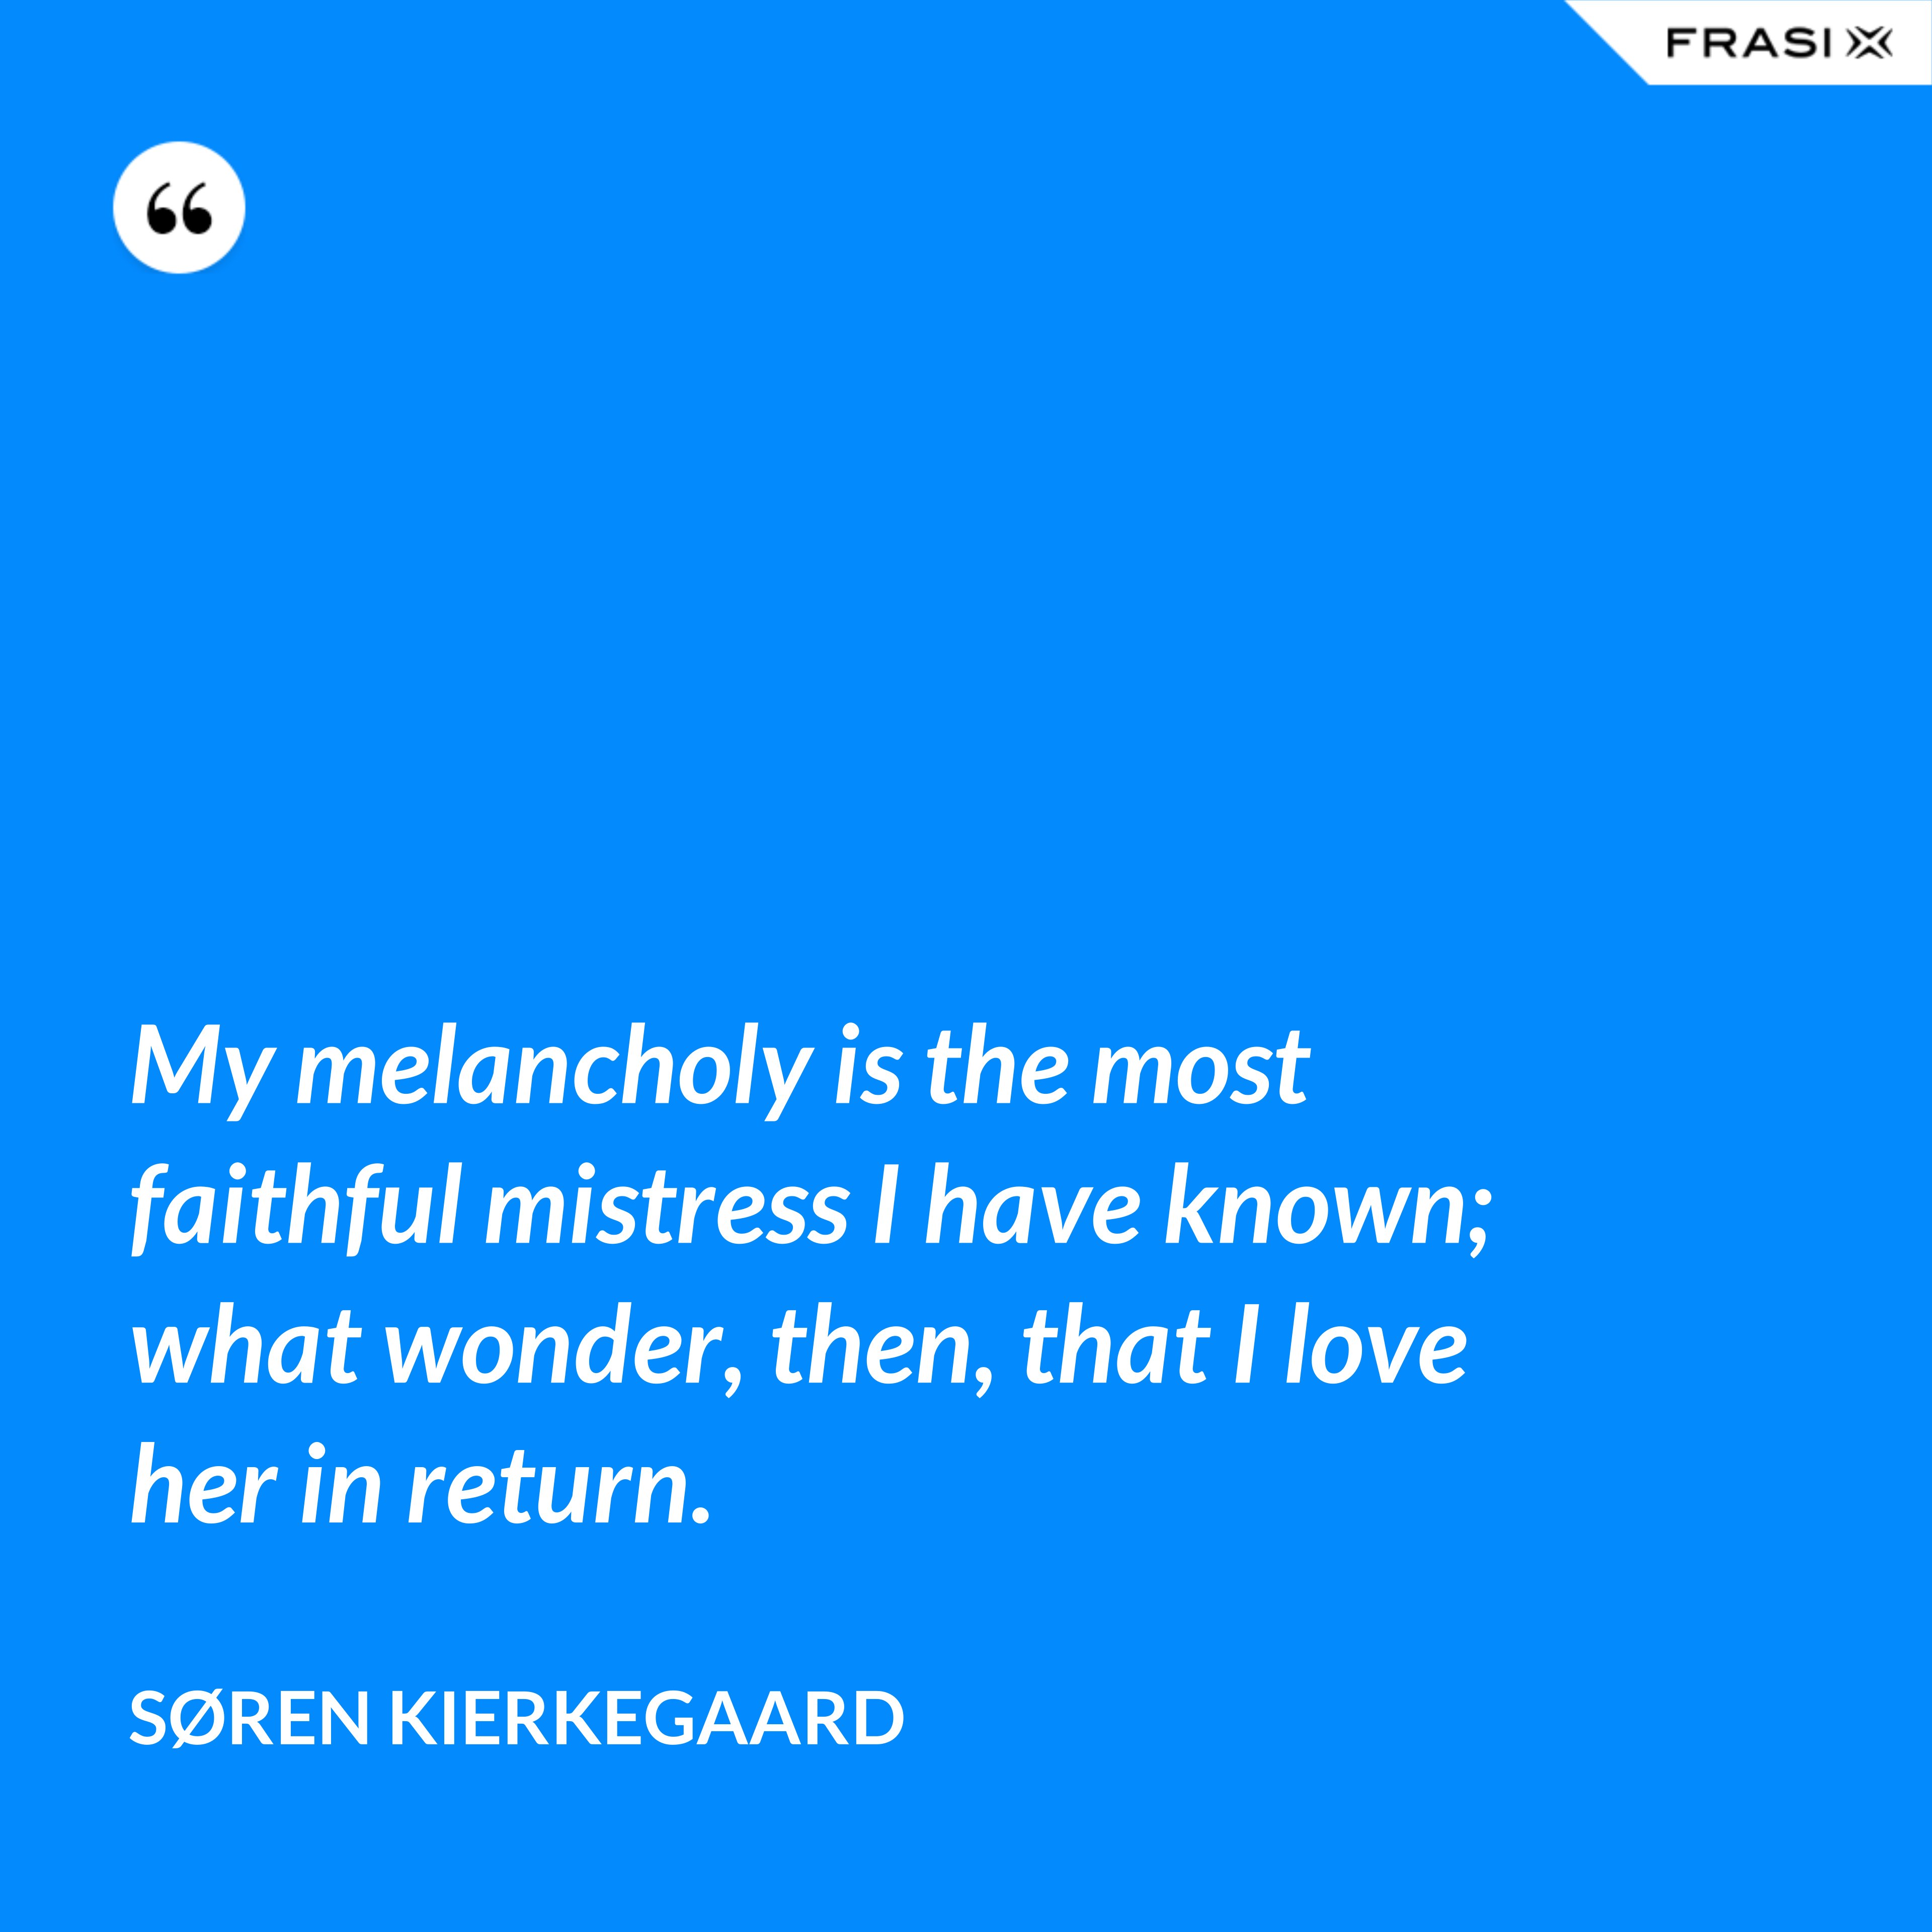 My melancholy is the most faithful mistress I have known; what wonder, then, that I love her in return. - Søren Kierkegaard